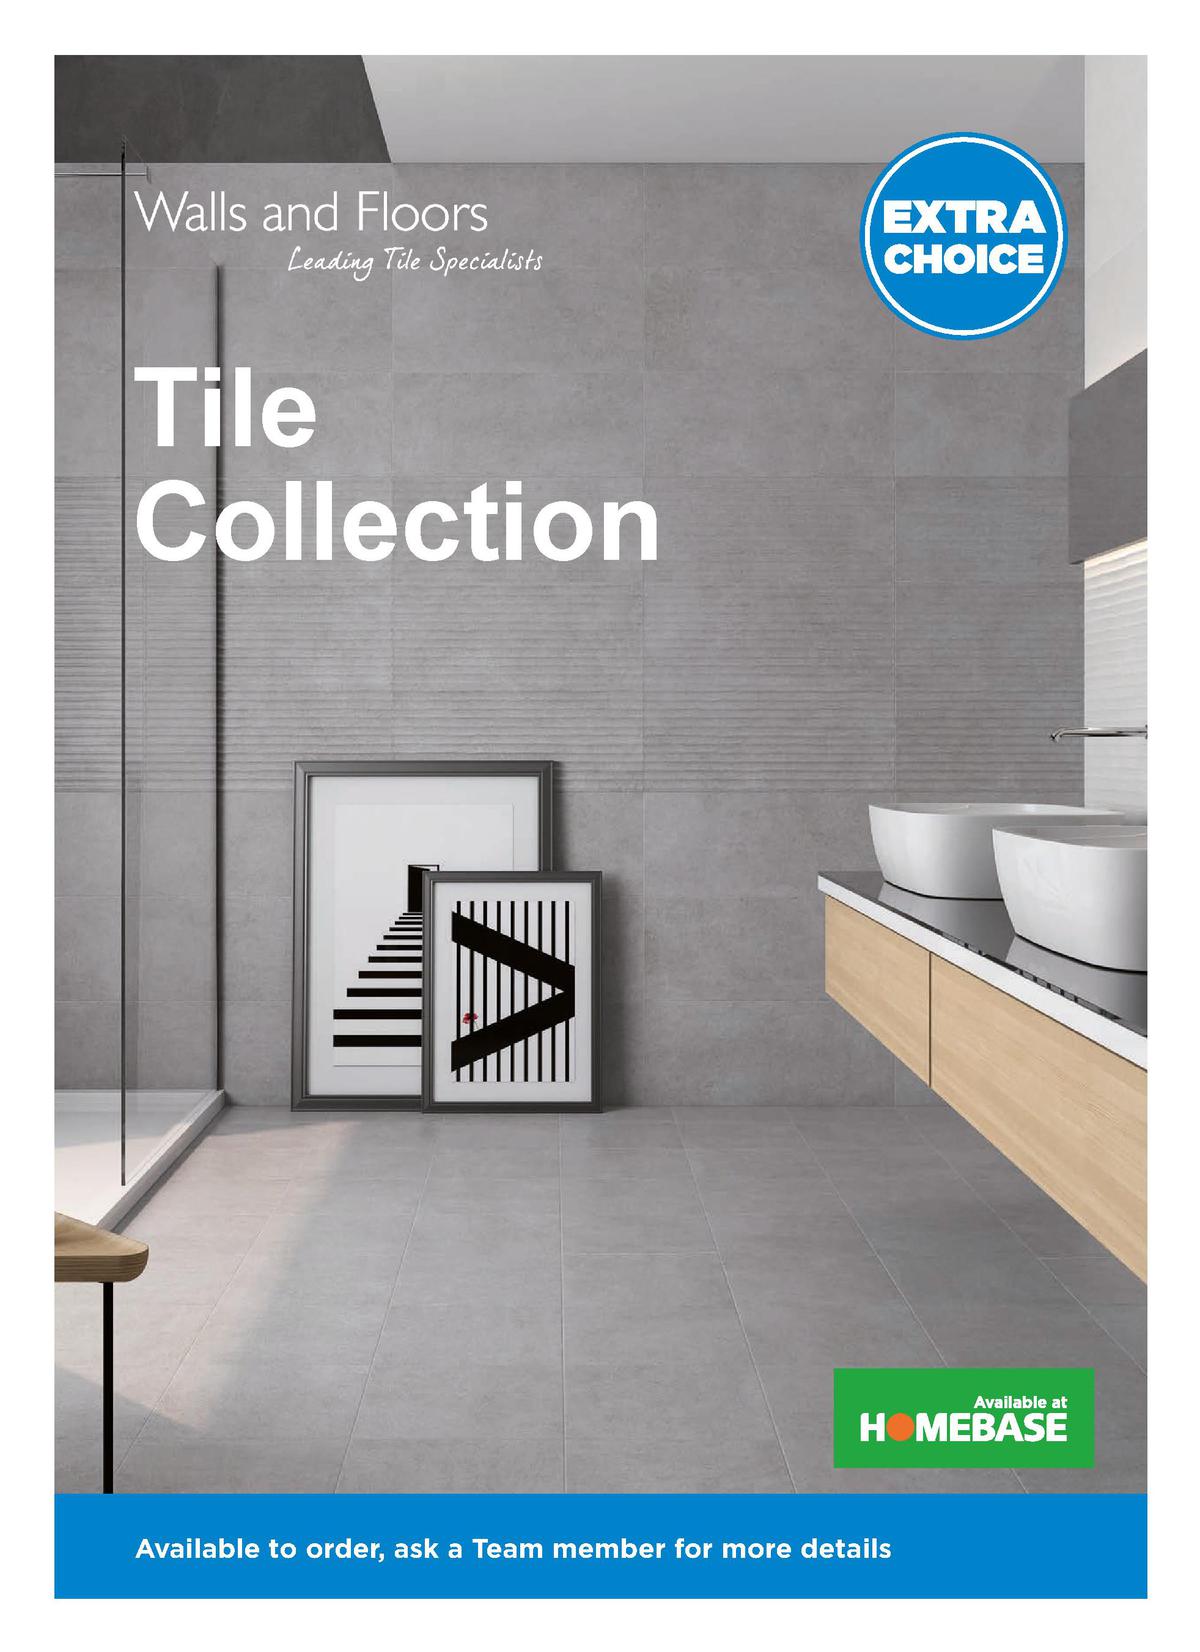 Homebase Walls & Floors tiling Offers from 1 May